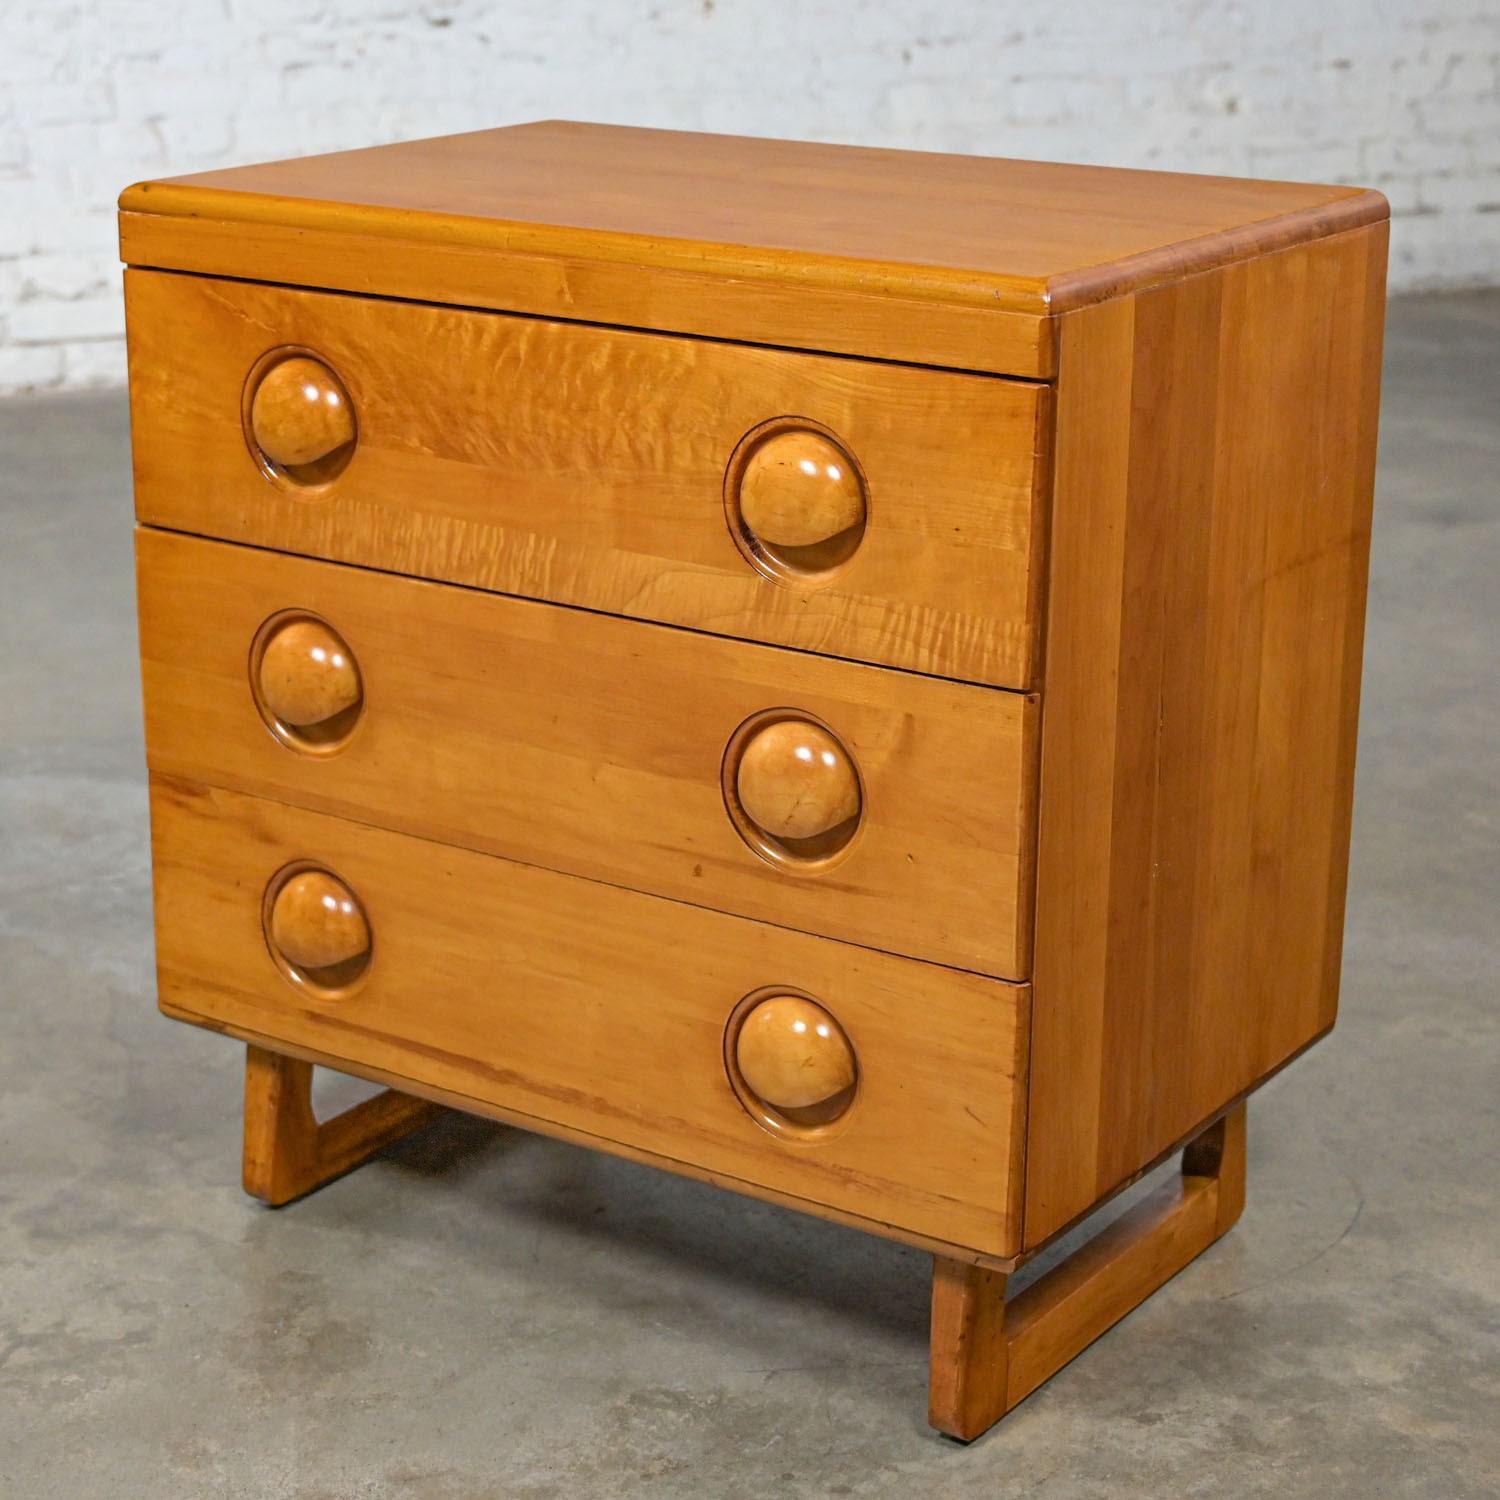 Streamlined Moderne Early to Mid-20th Century Art Moderne Maple Small 3 Drawer Chest or Cabinet For Sale